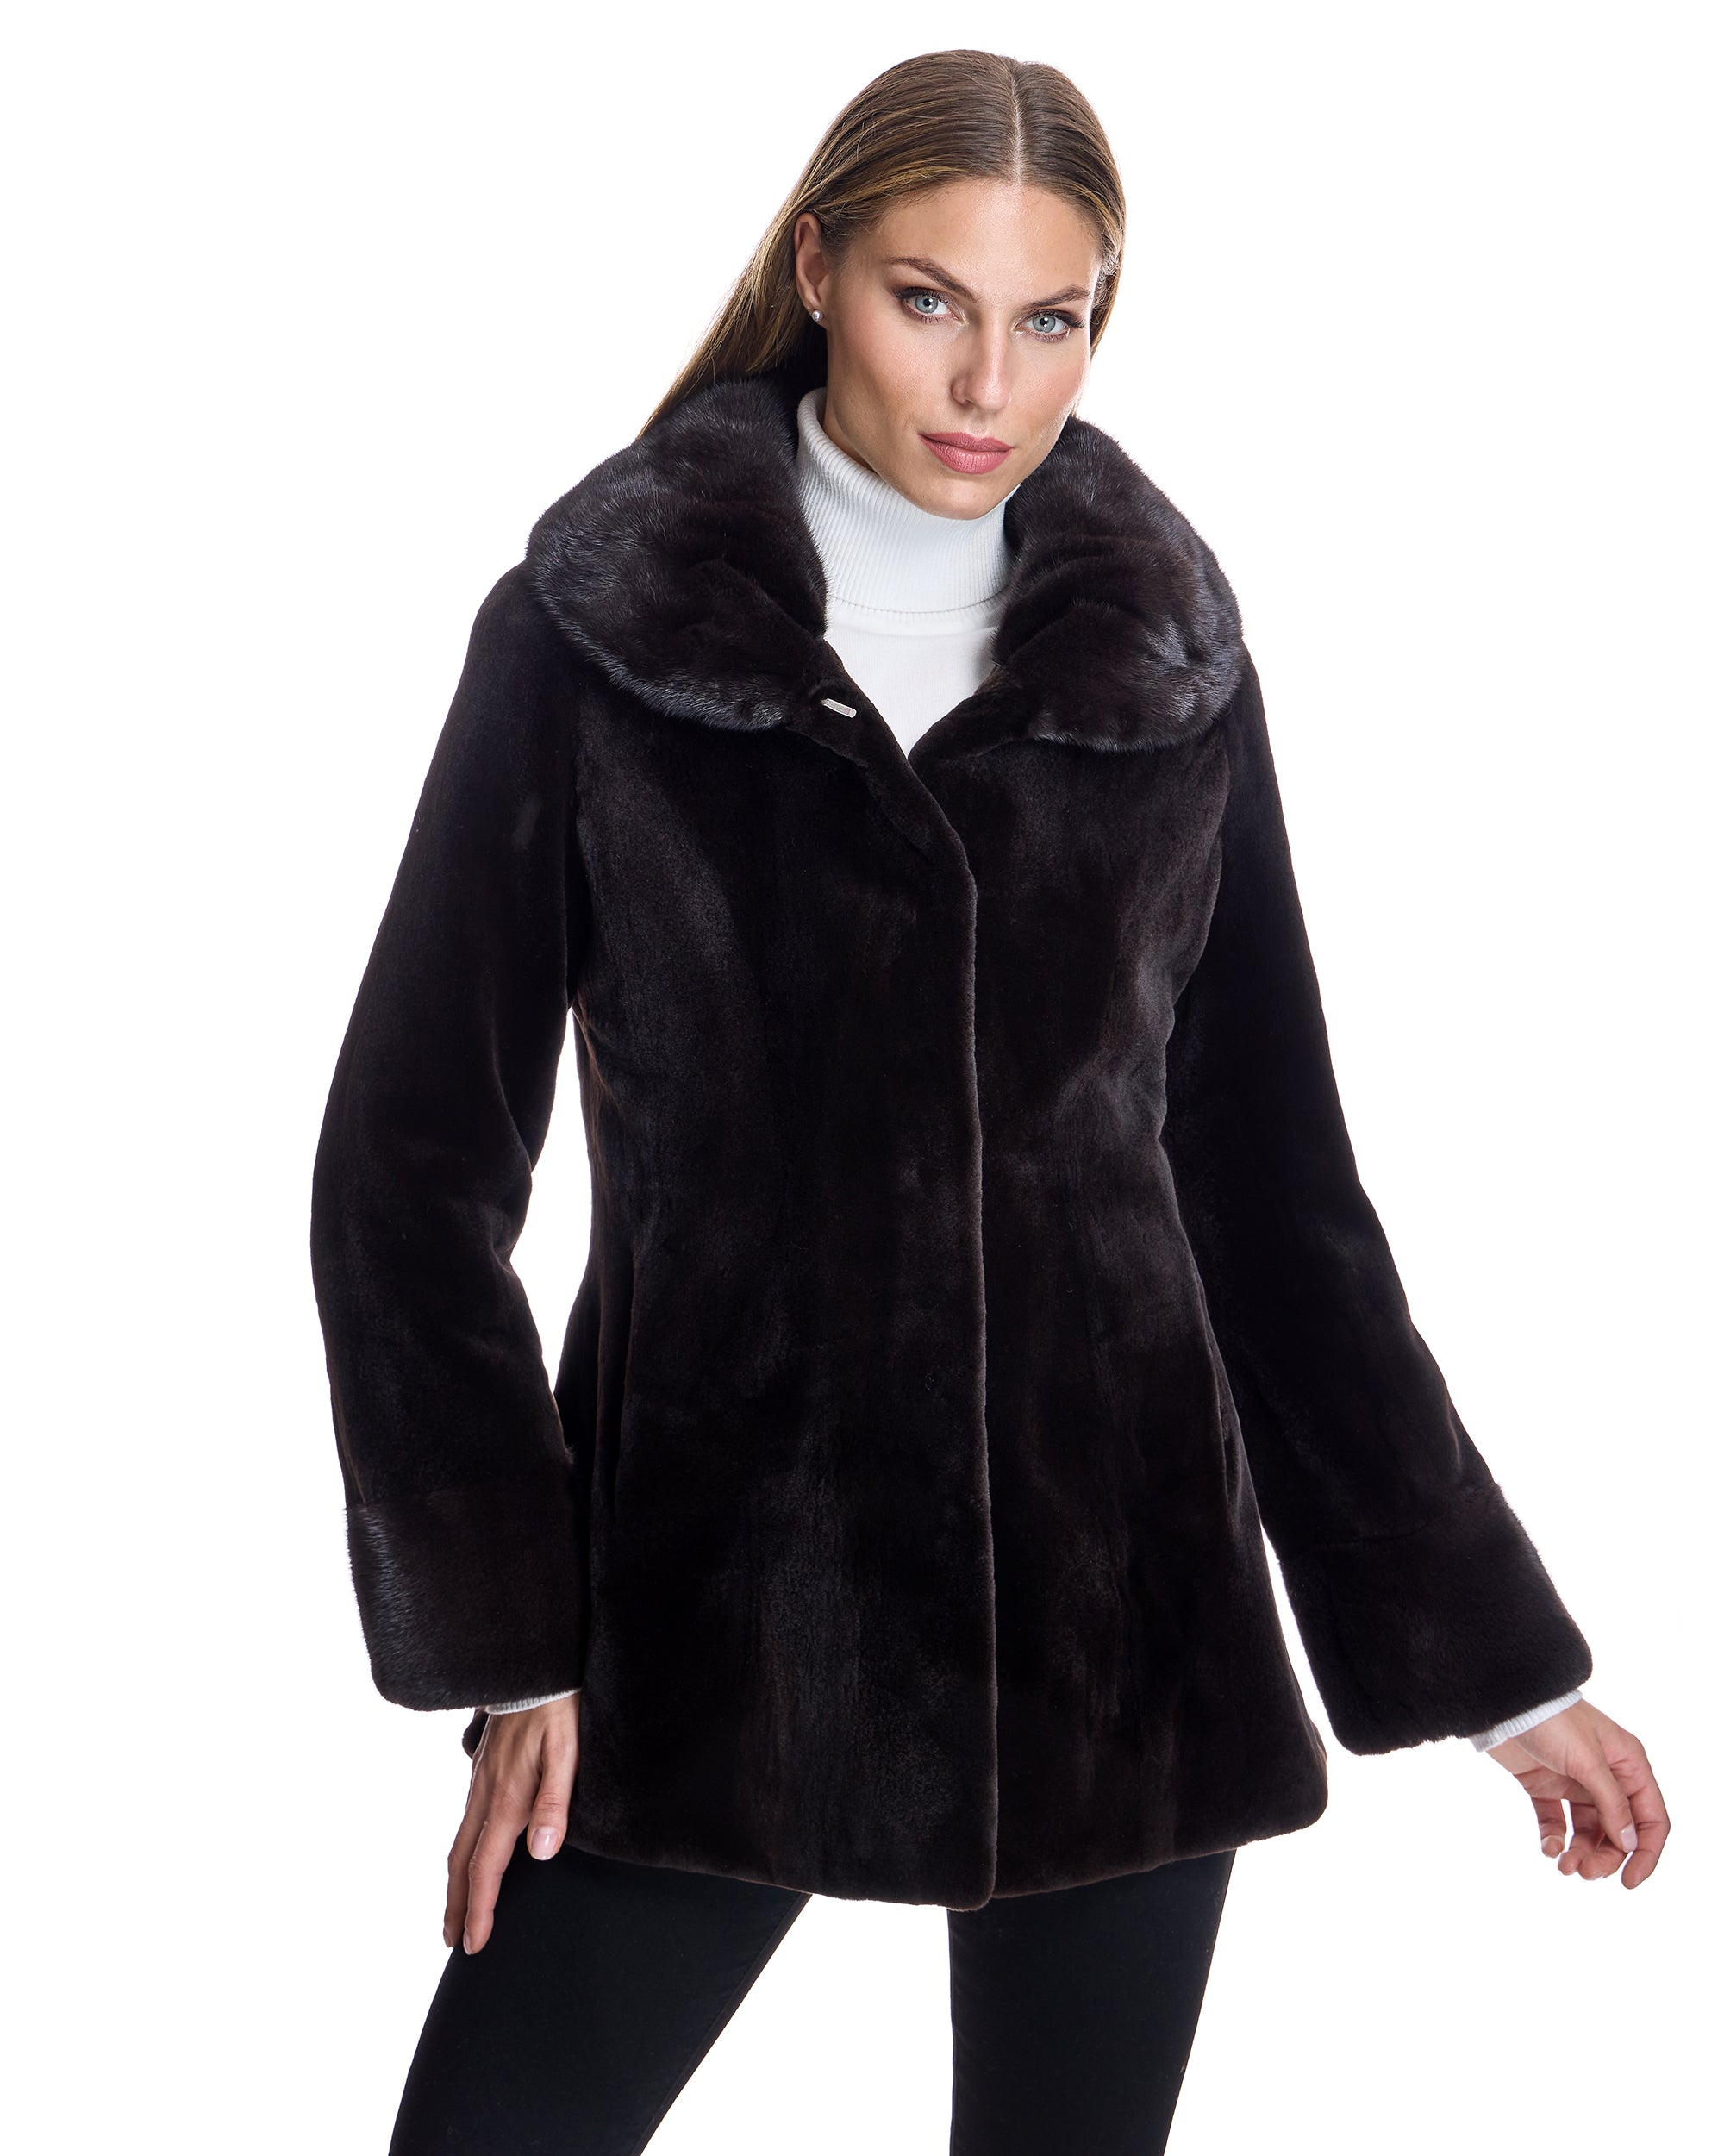 Sheared Mink Jacket with Round Long Hair mink Collar